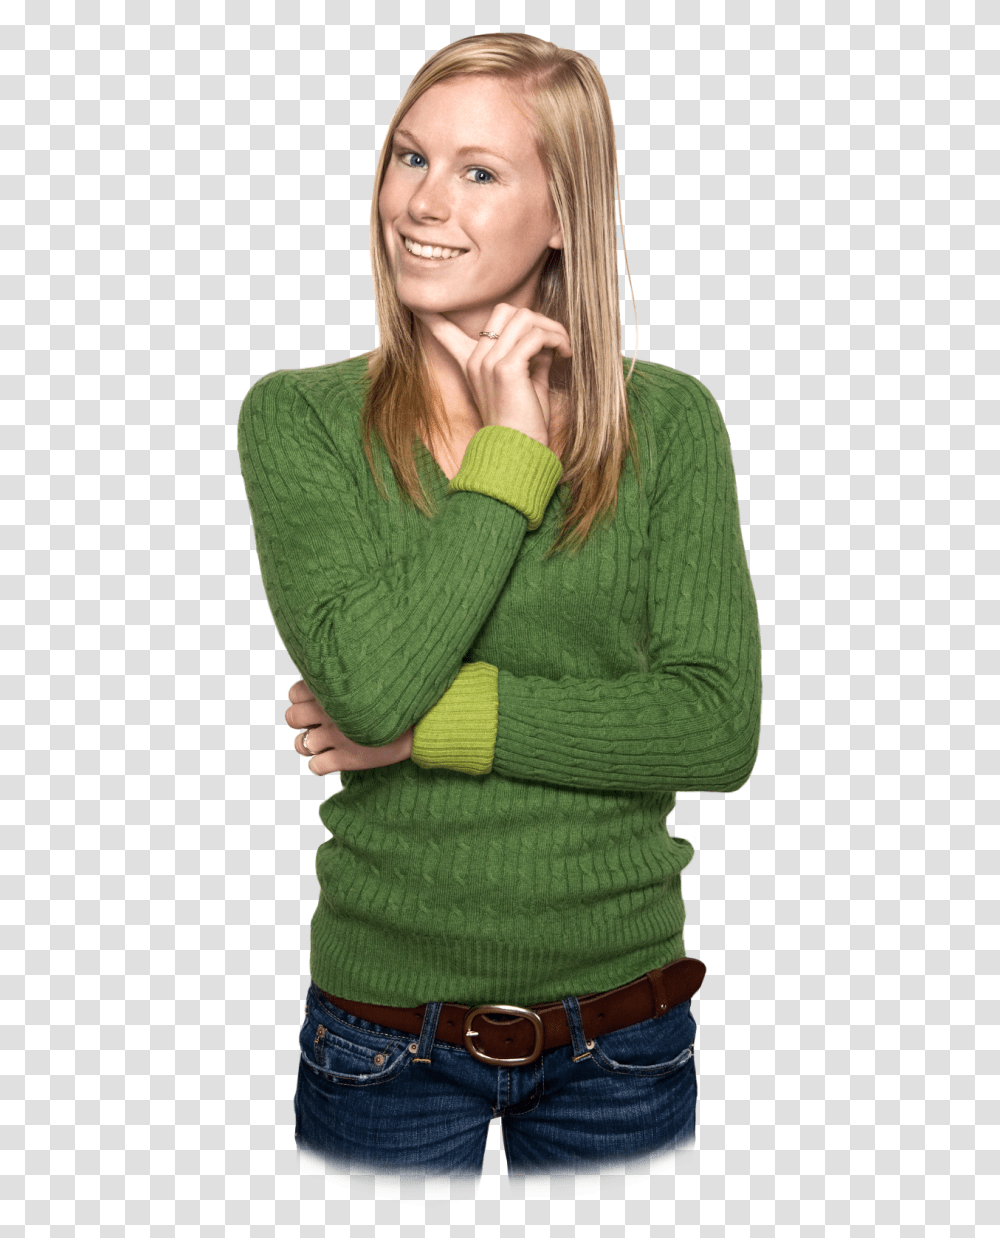 Download For Free Thinking Woman Image Sibirskoe Zdorove Uhod Za Volosami, Apparel, Sweater, Person Transparent Png